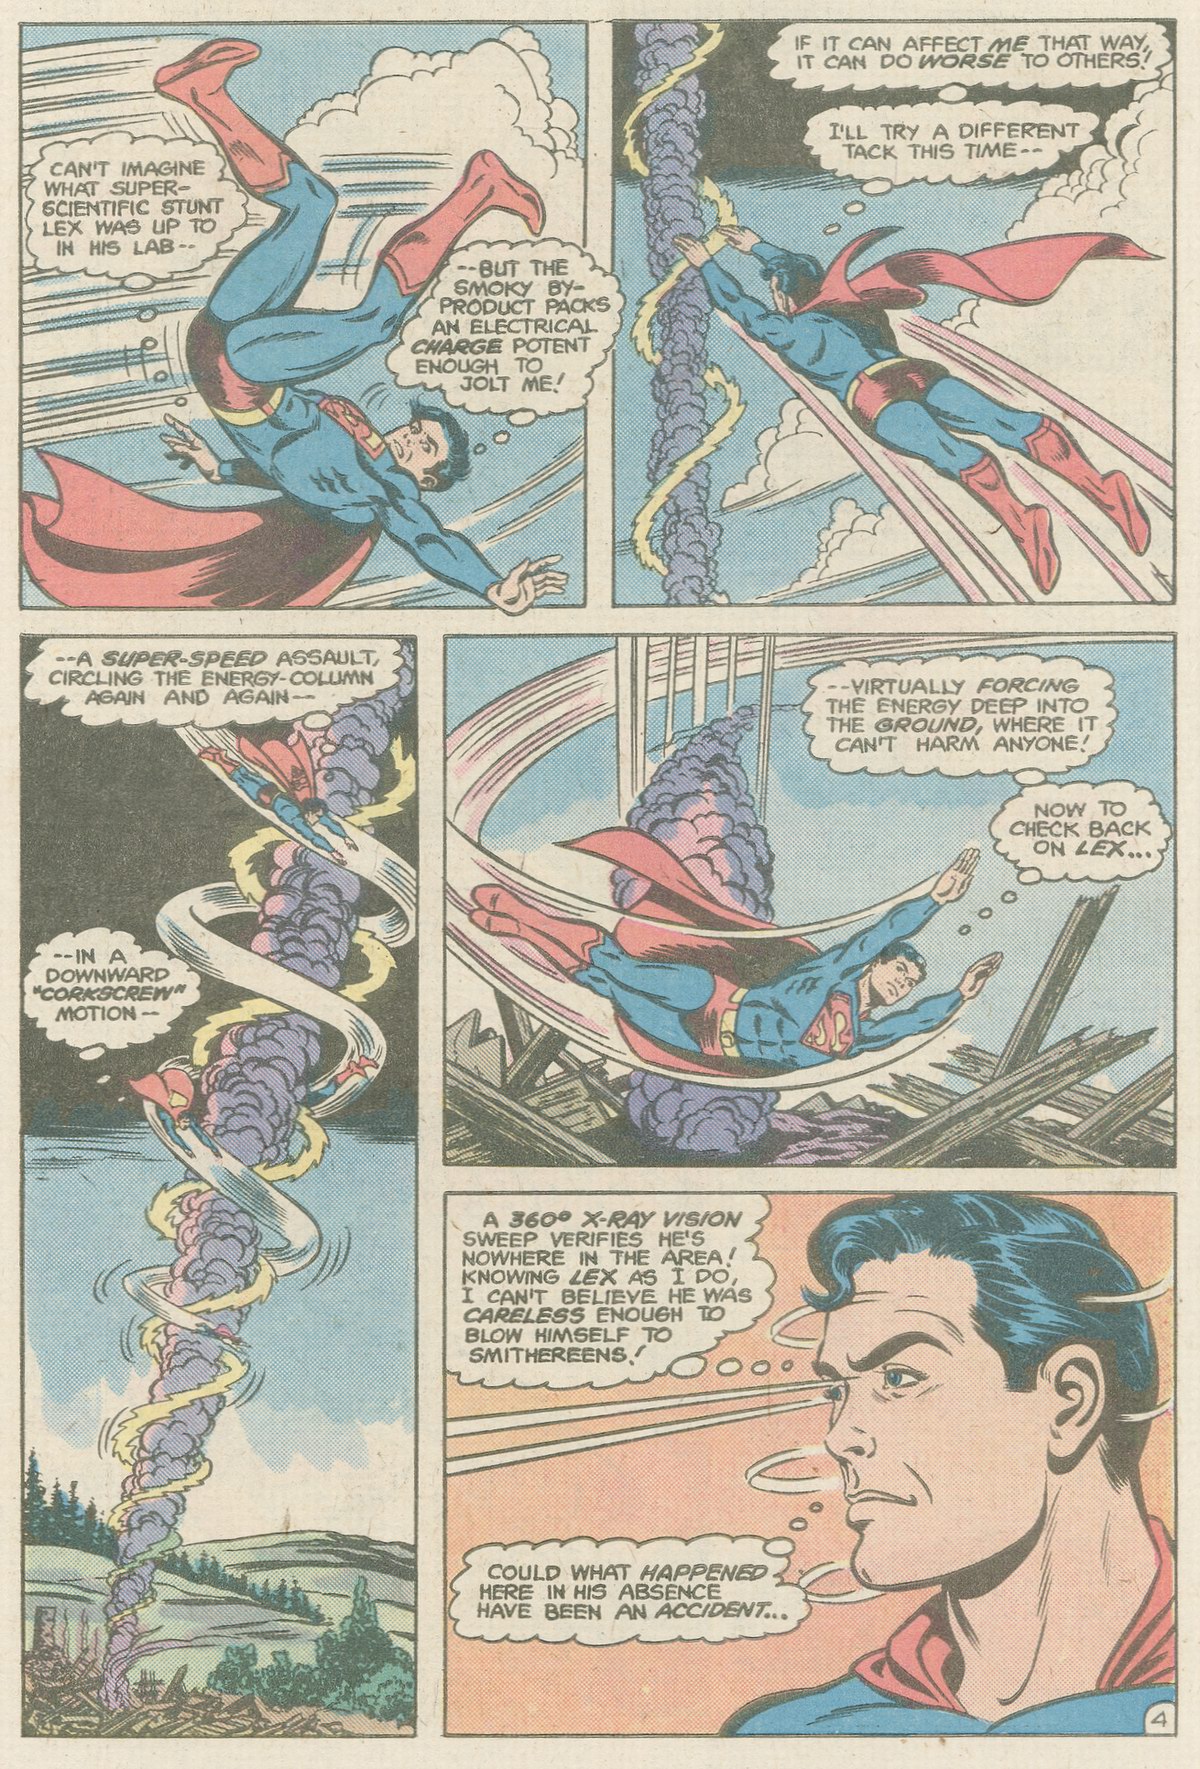 The New Adventures of Superboy 11 Page 4